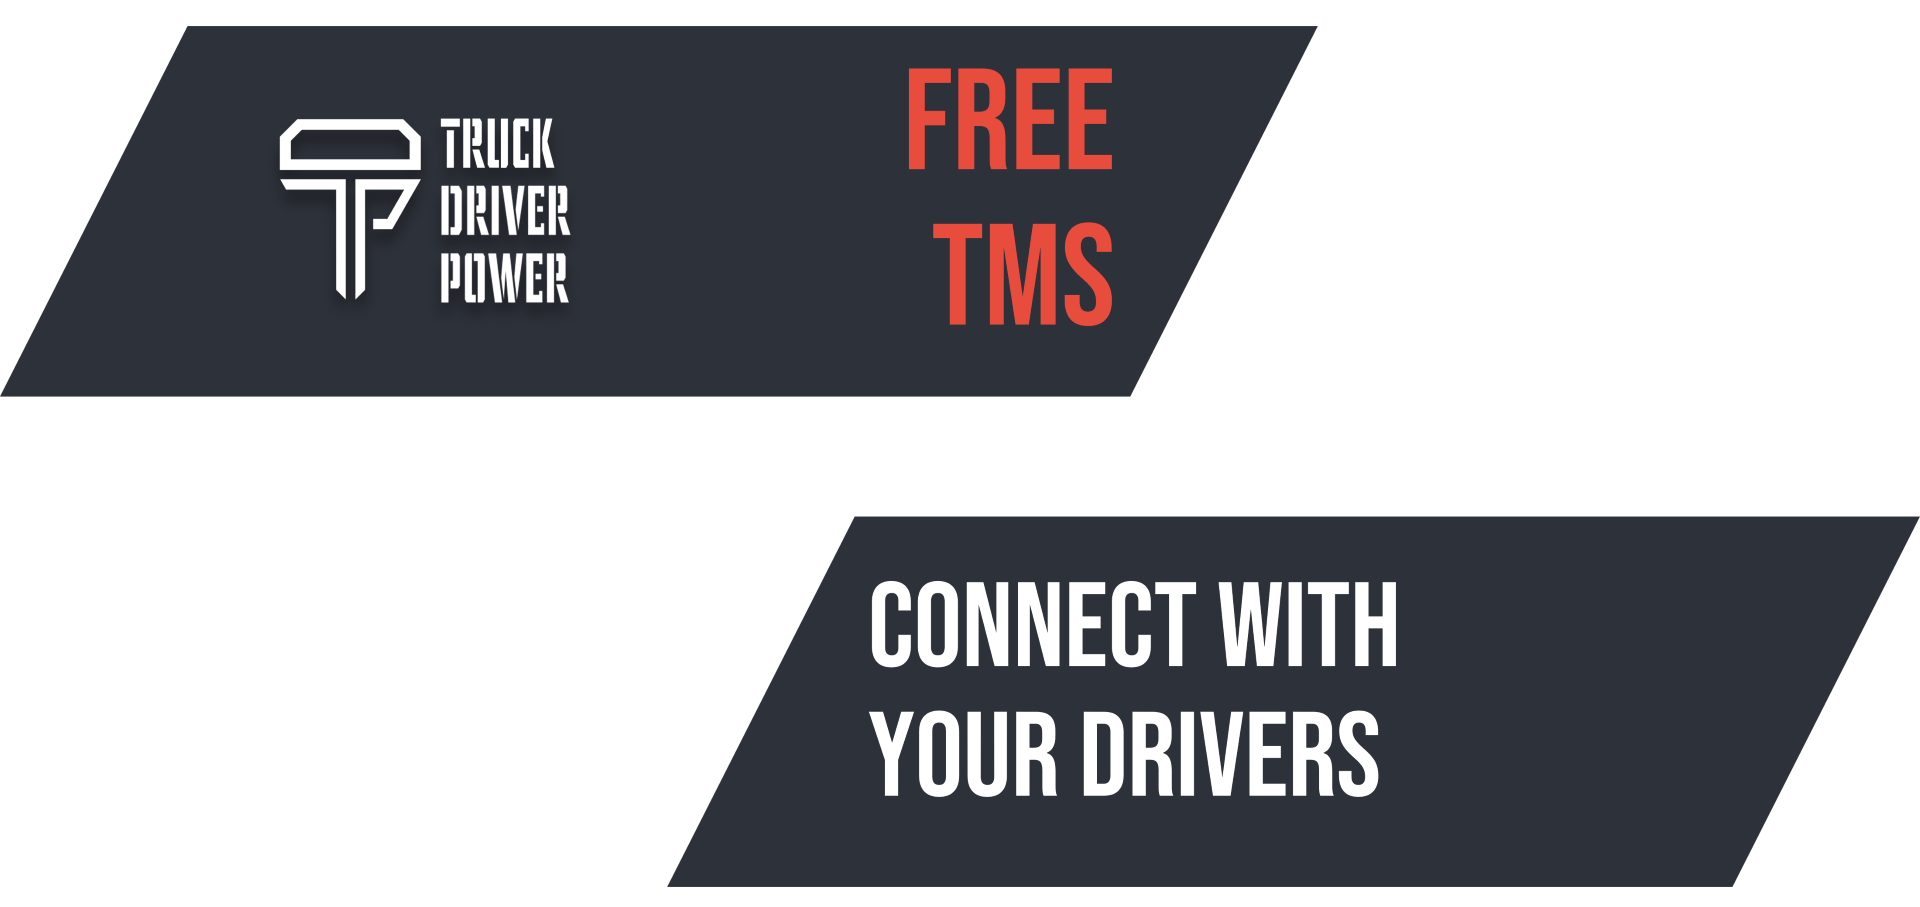 FREE TMS - Connect with your drivers (Reduced)